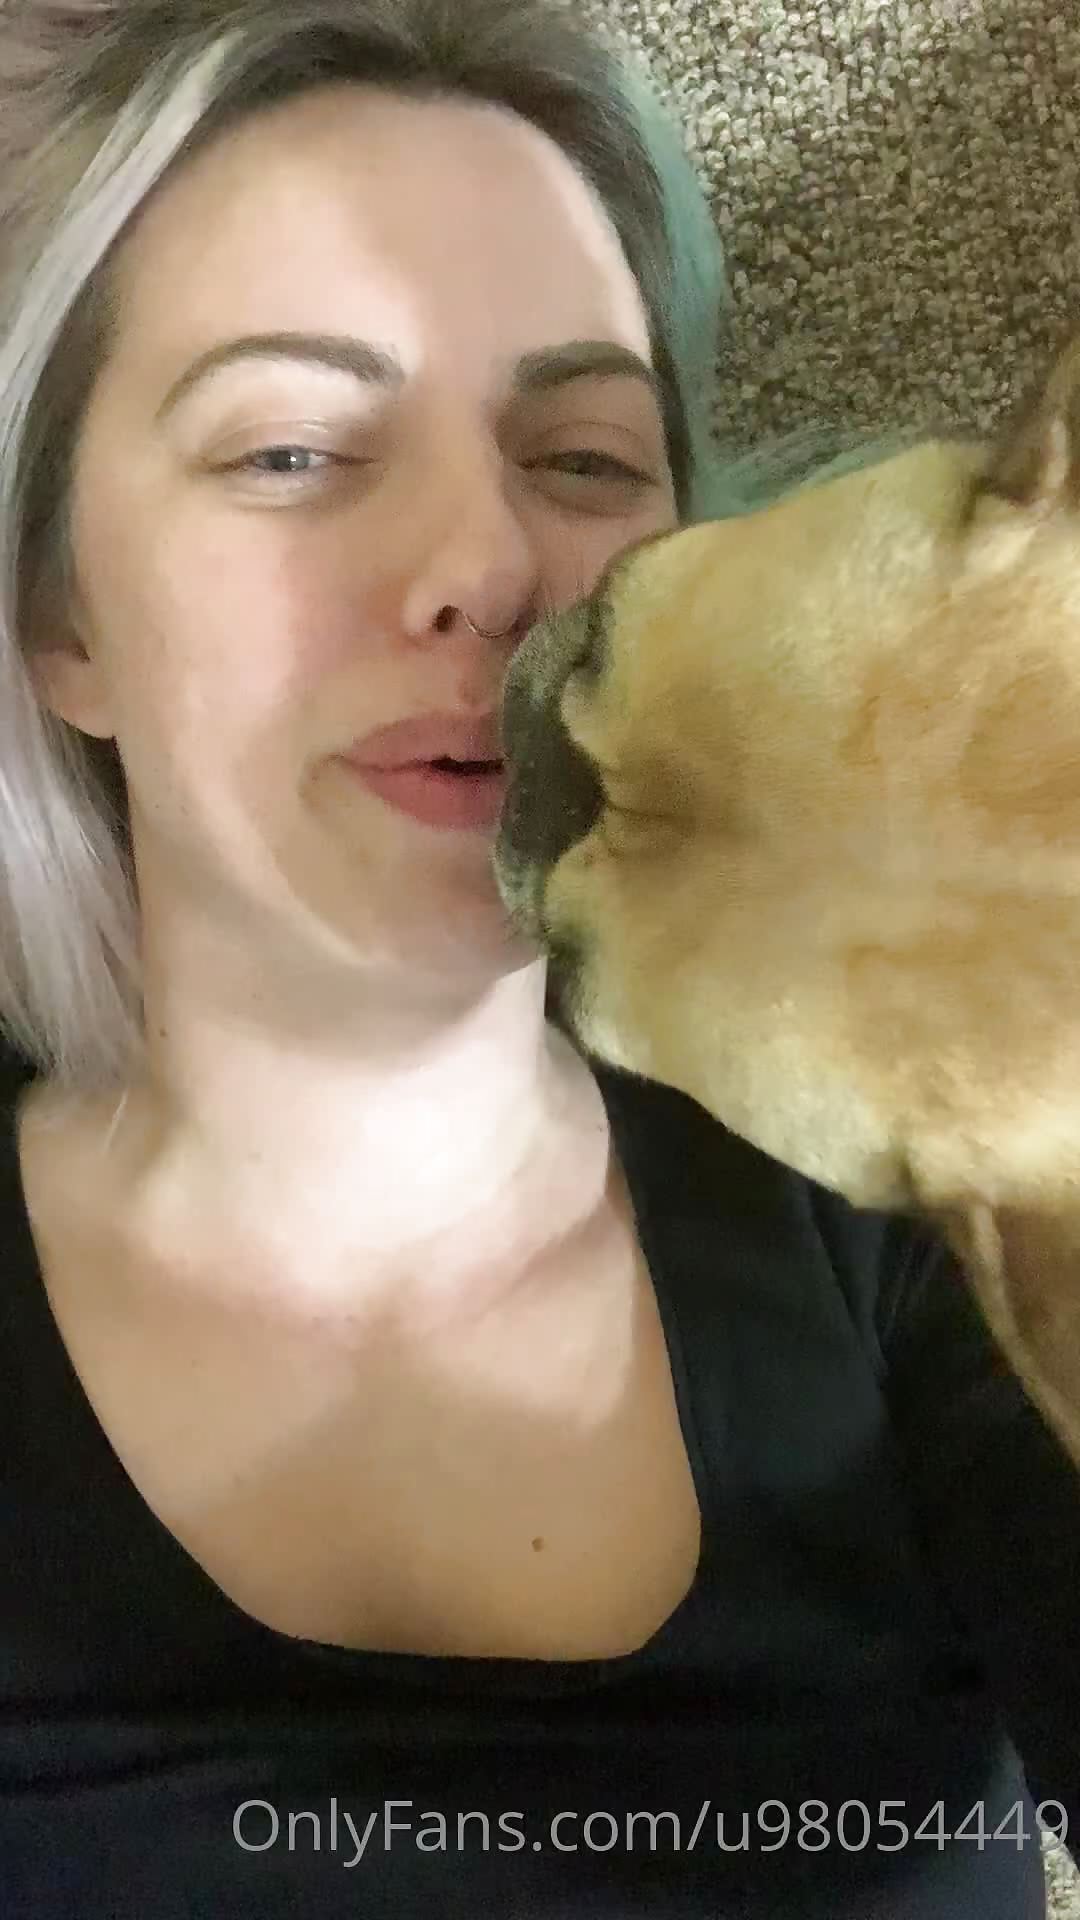 Make out with dog